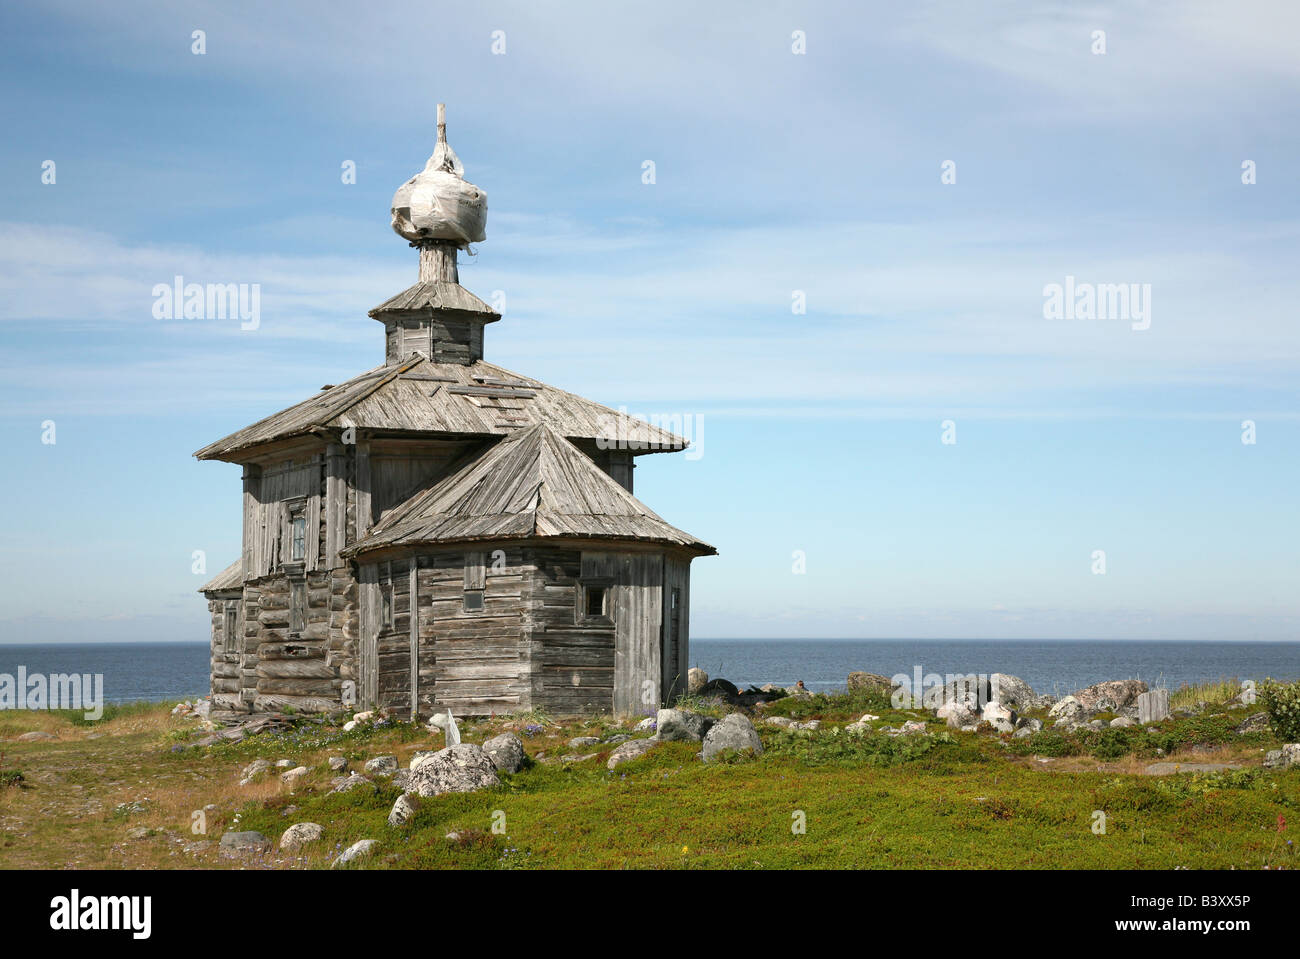 St Andrew's Church on the Zayatsky islands close to the Solovetsky Islands in the White Sea, Russia Stock Photo